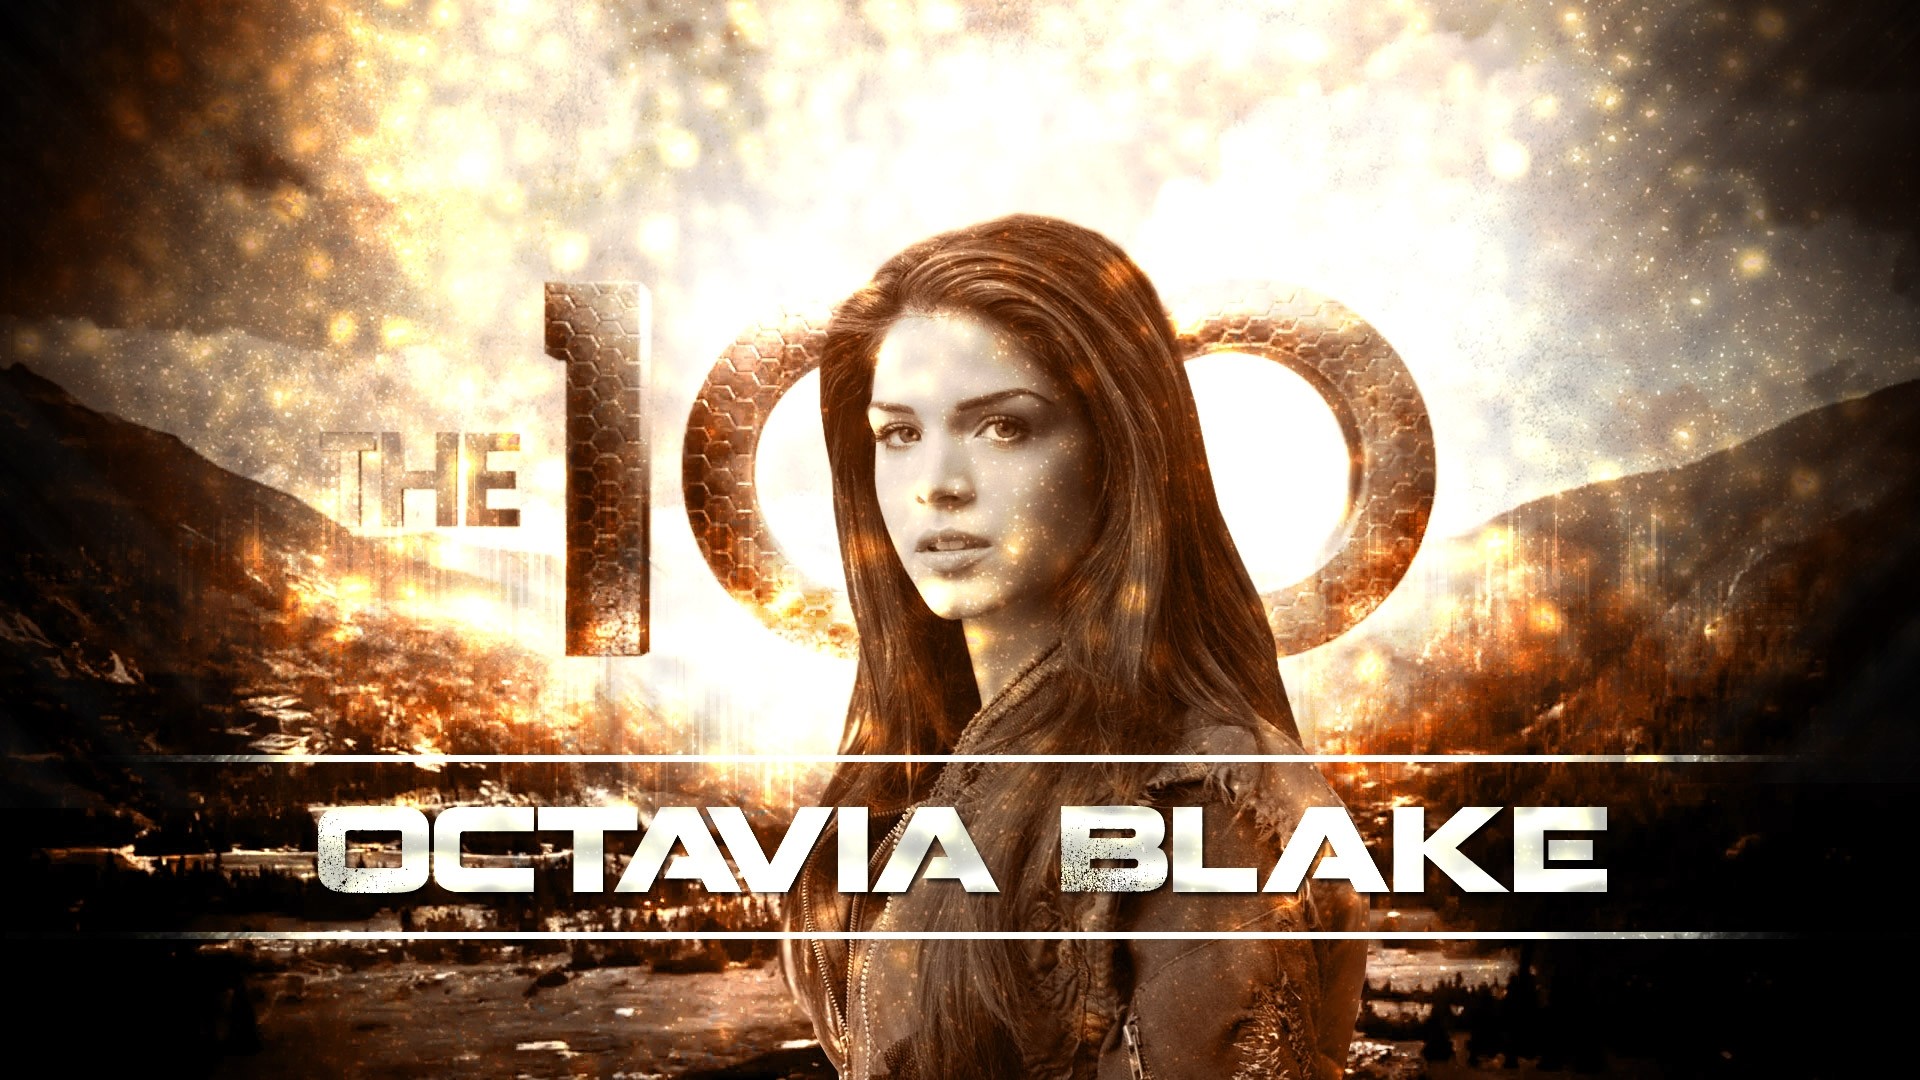 1920x1080 21 The 100 HD Wallpapers | Backgrounds - Wallpaper Abyss